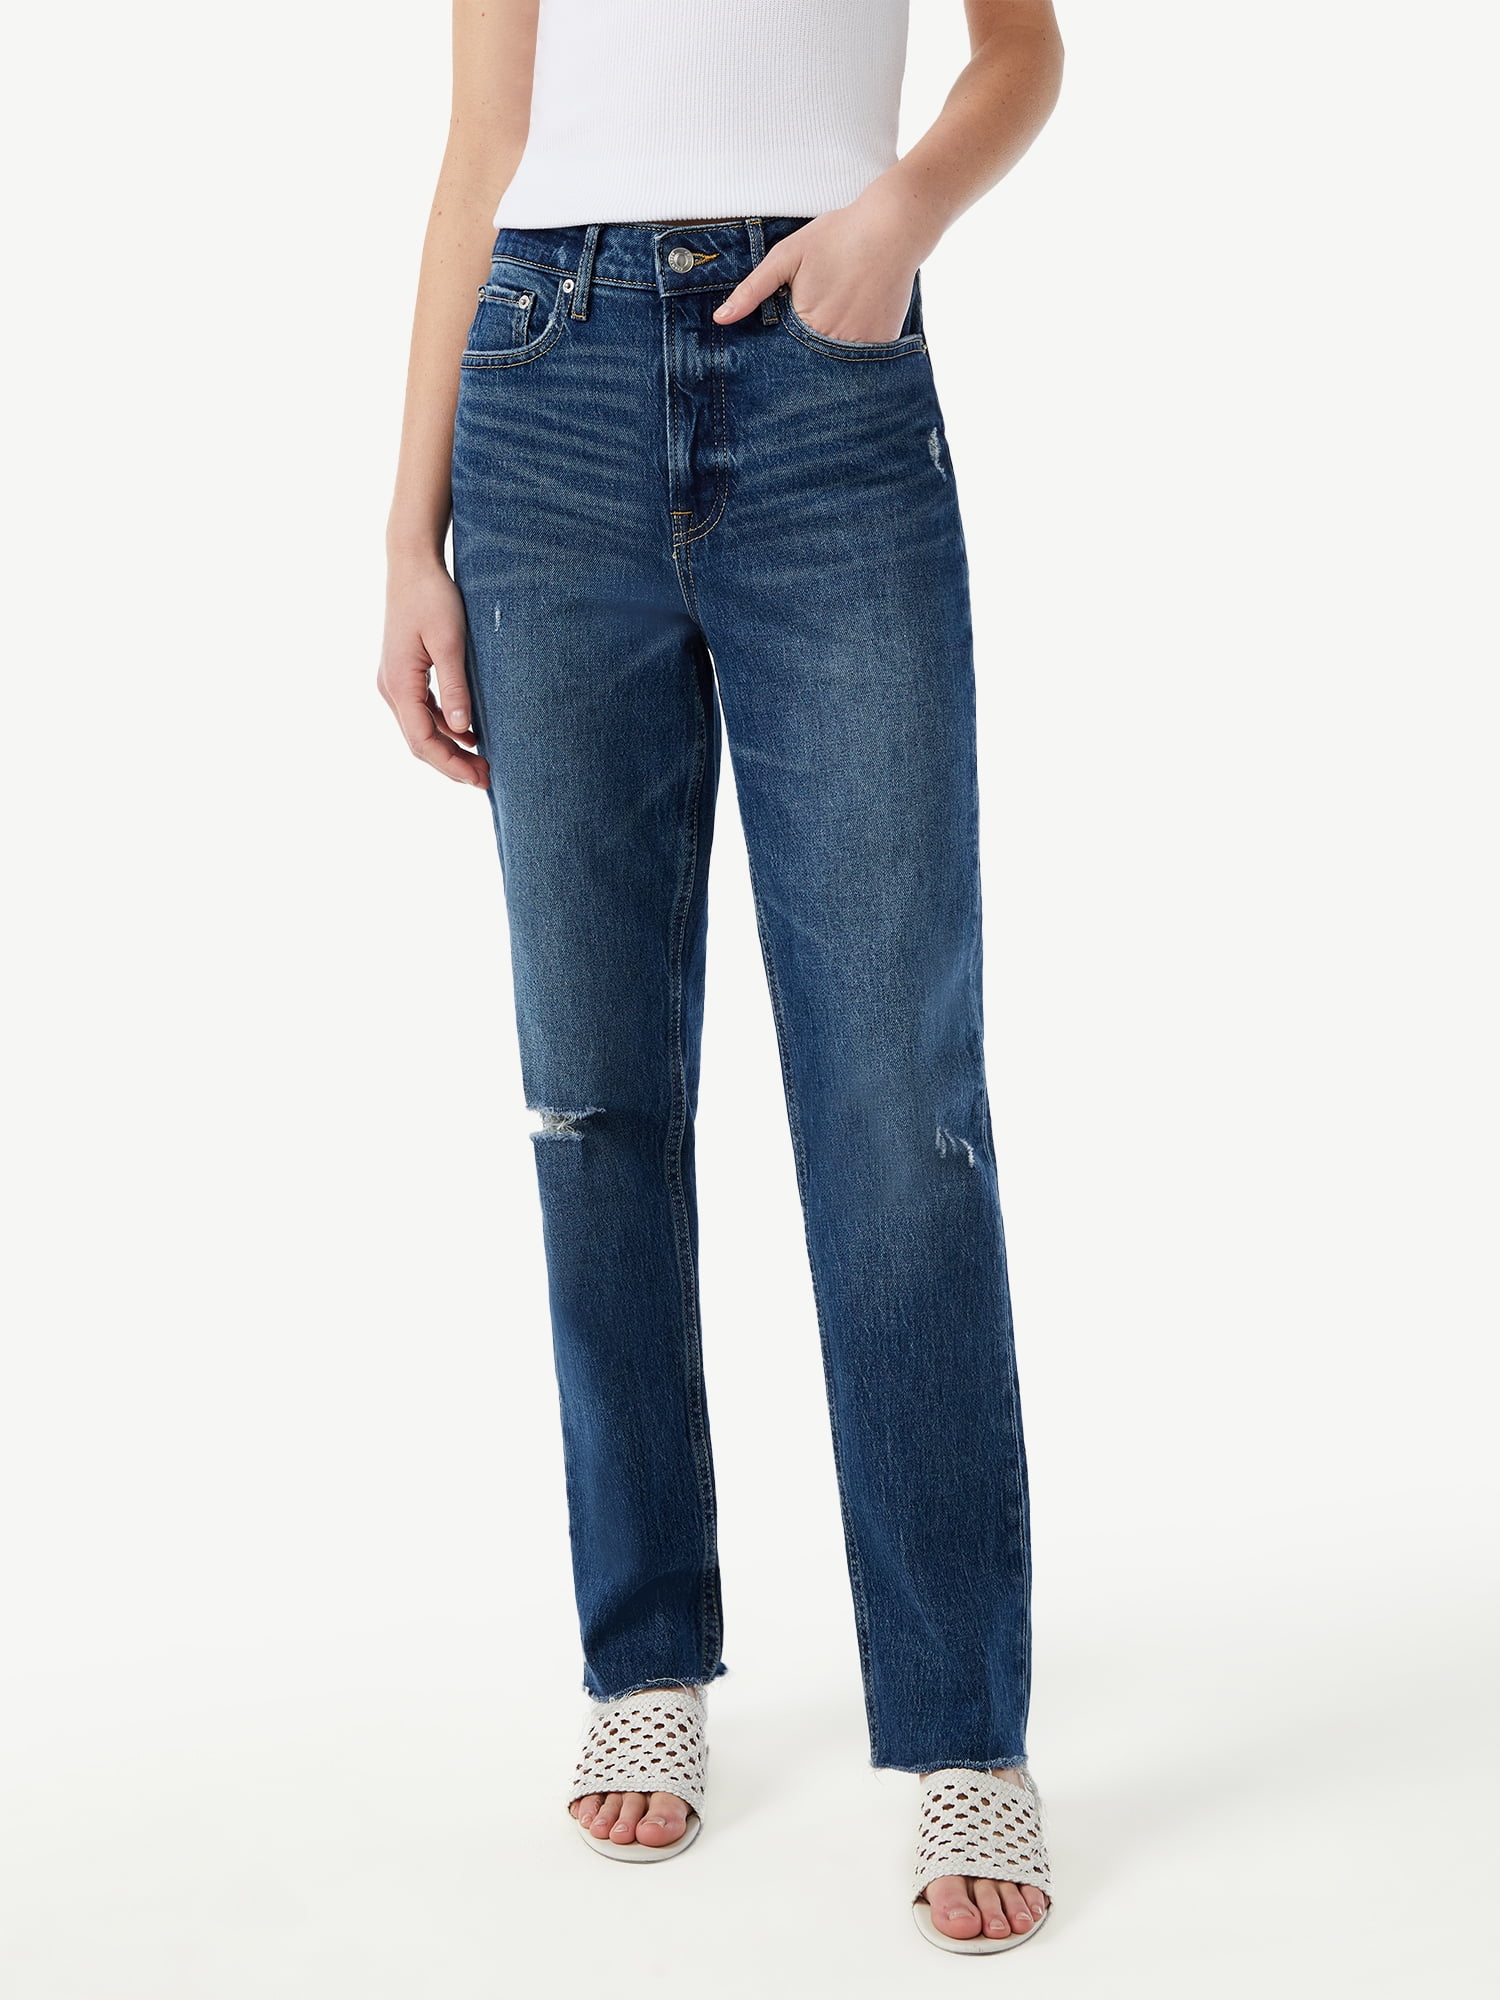 Free Assembly Women's Super High Rise Straight Jeans